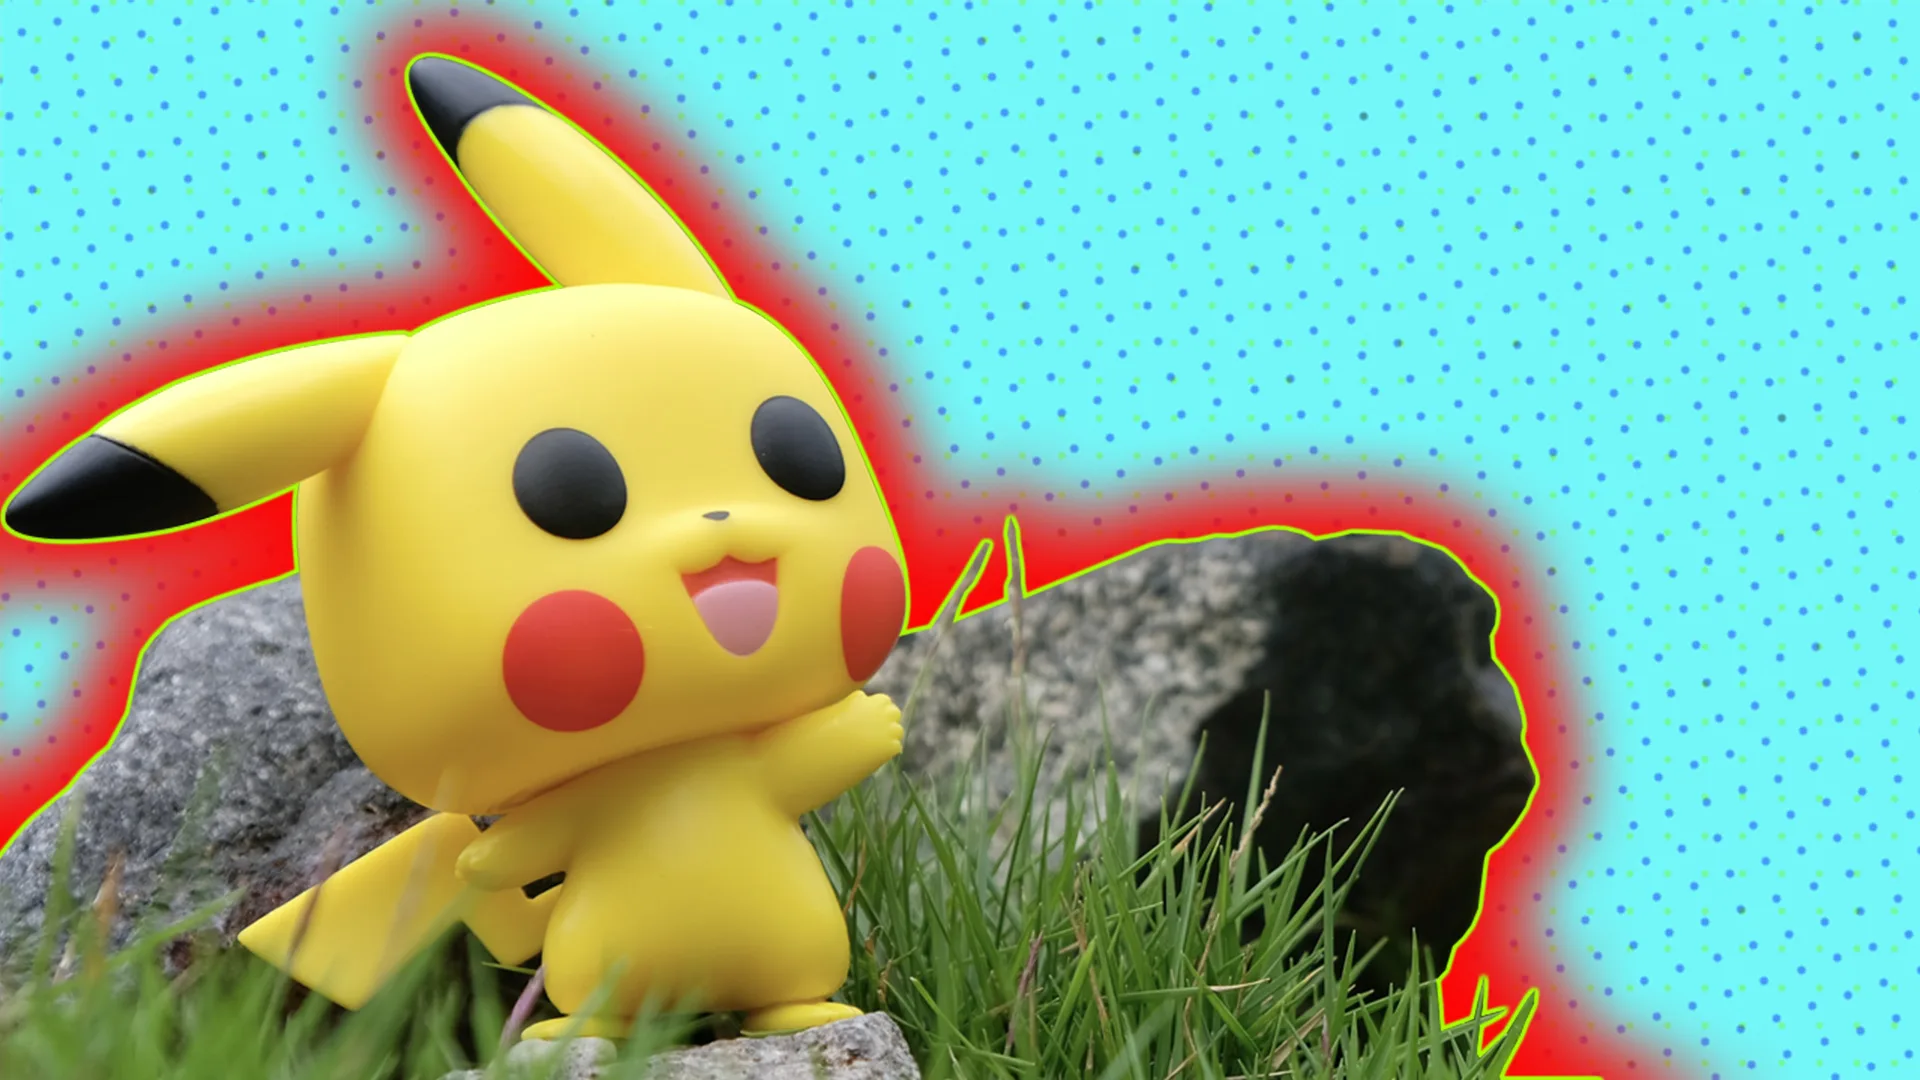 Pikachu with a polkadot background and a glow around the image